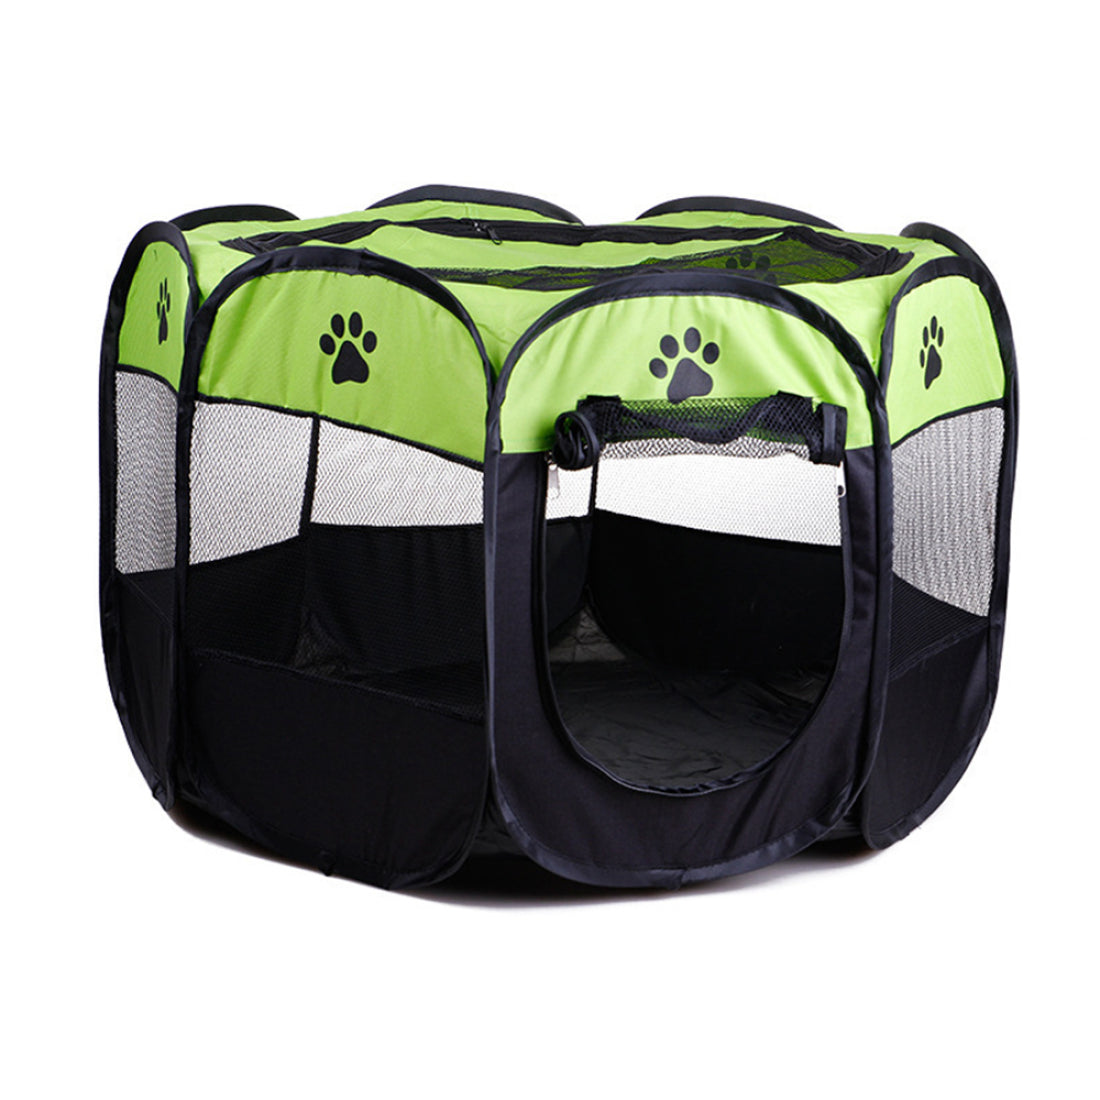 Bhxteng Portable Folding Pet Tent Octagonal Cage for Outdoor Big Dogs House